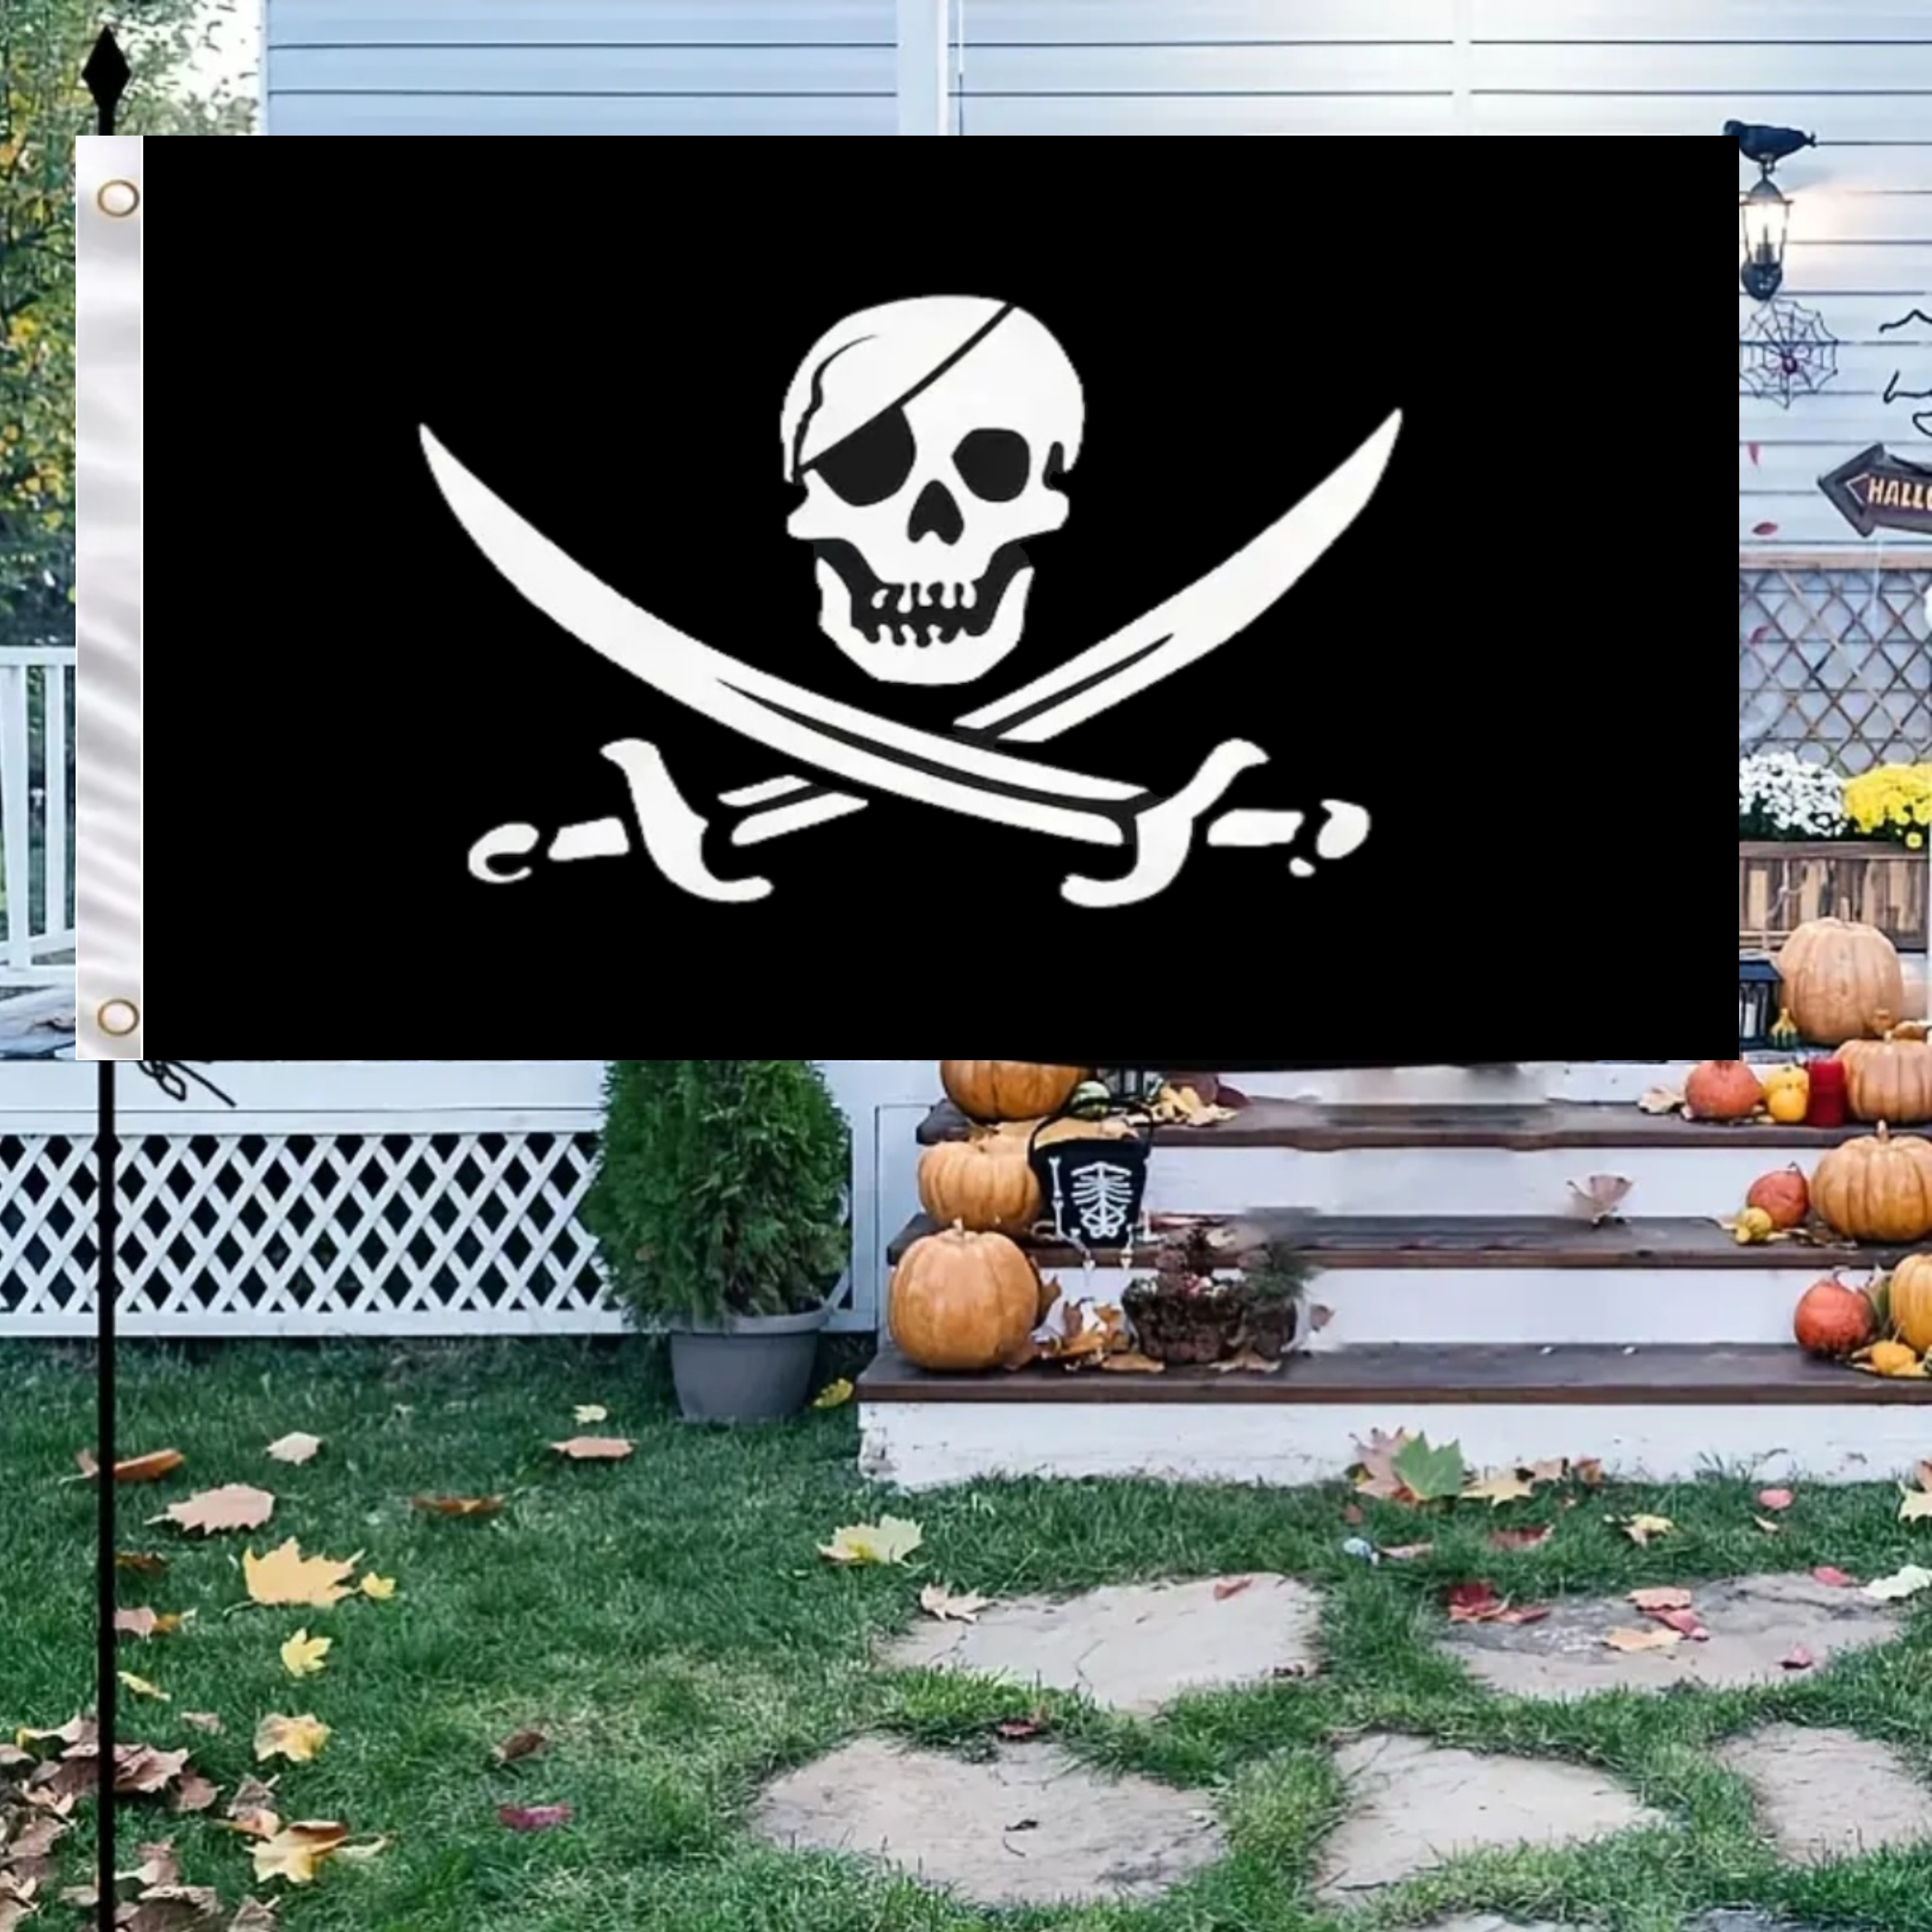 

1pc, Jolly Roger And Cross Sabres Swords Pirate Flag (5*3fts, 3*2fts), High-quality Hanging Flag With Polyester, Vivid Color And Uv Fade Resistant, National Flag Decoration, Outdoor Holiday Decoration